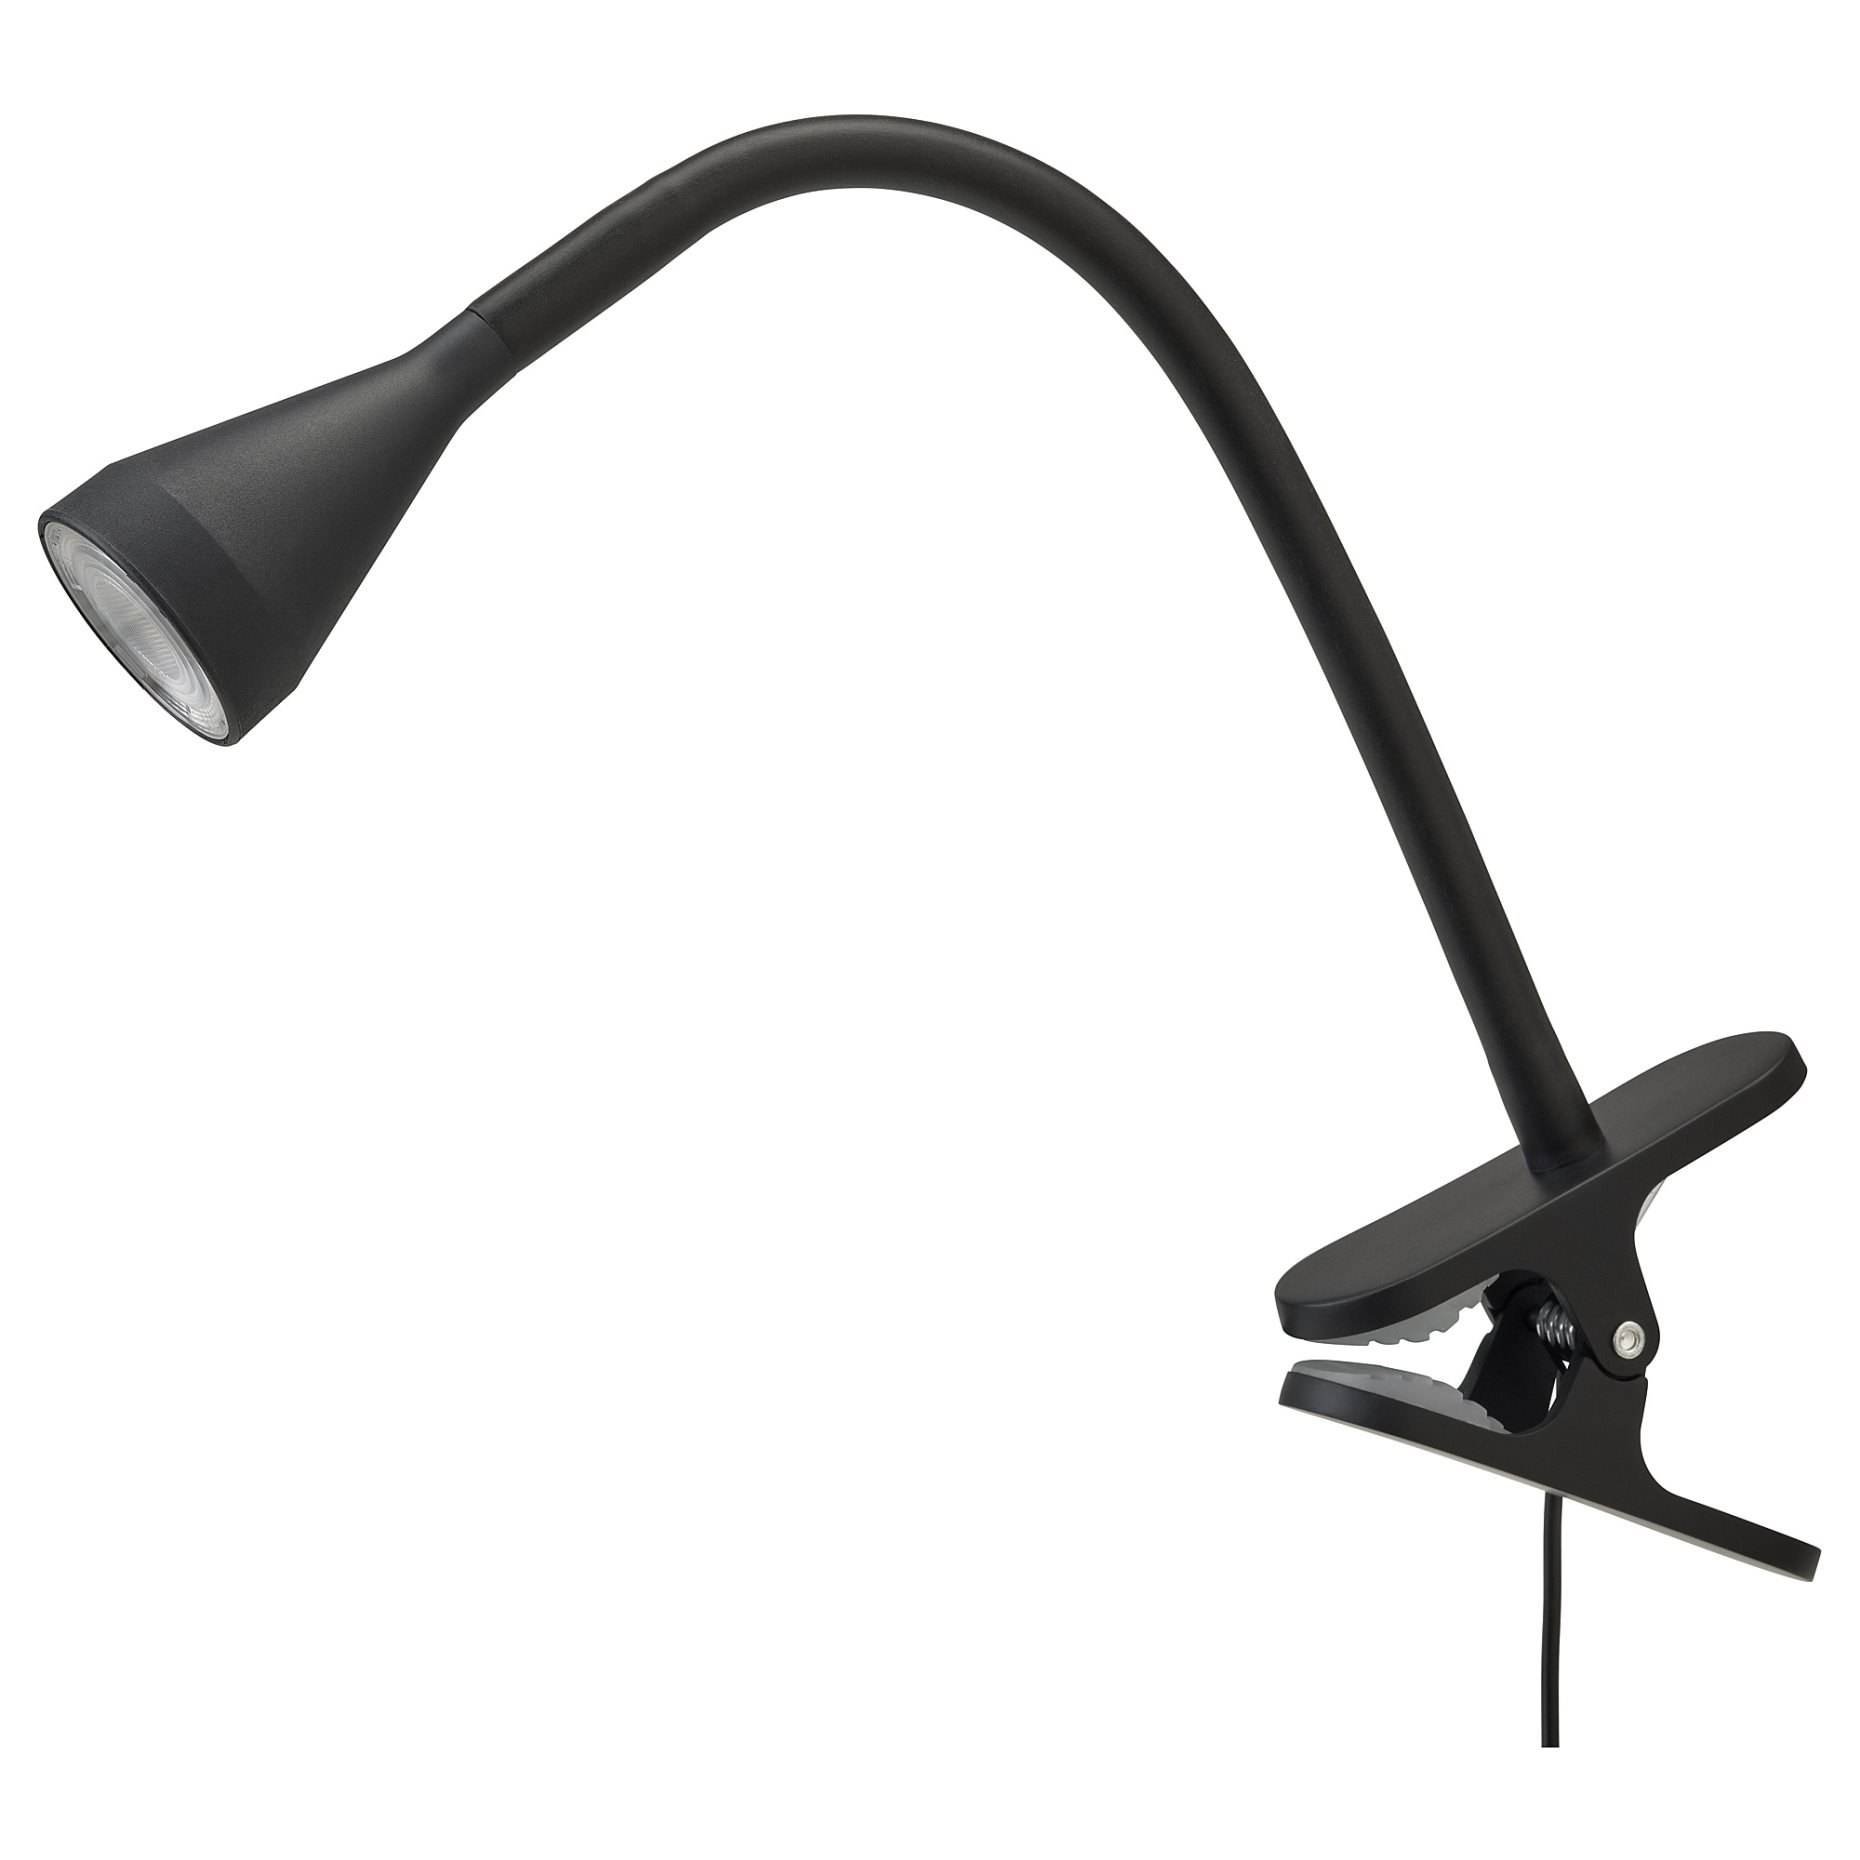 NÄVLINGE, clamp spotlight with built-in LED light source, 004.498.77